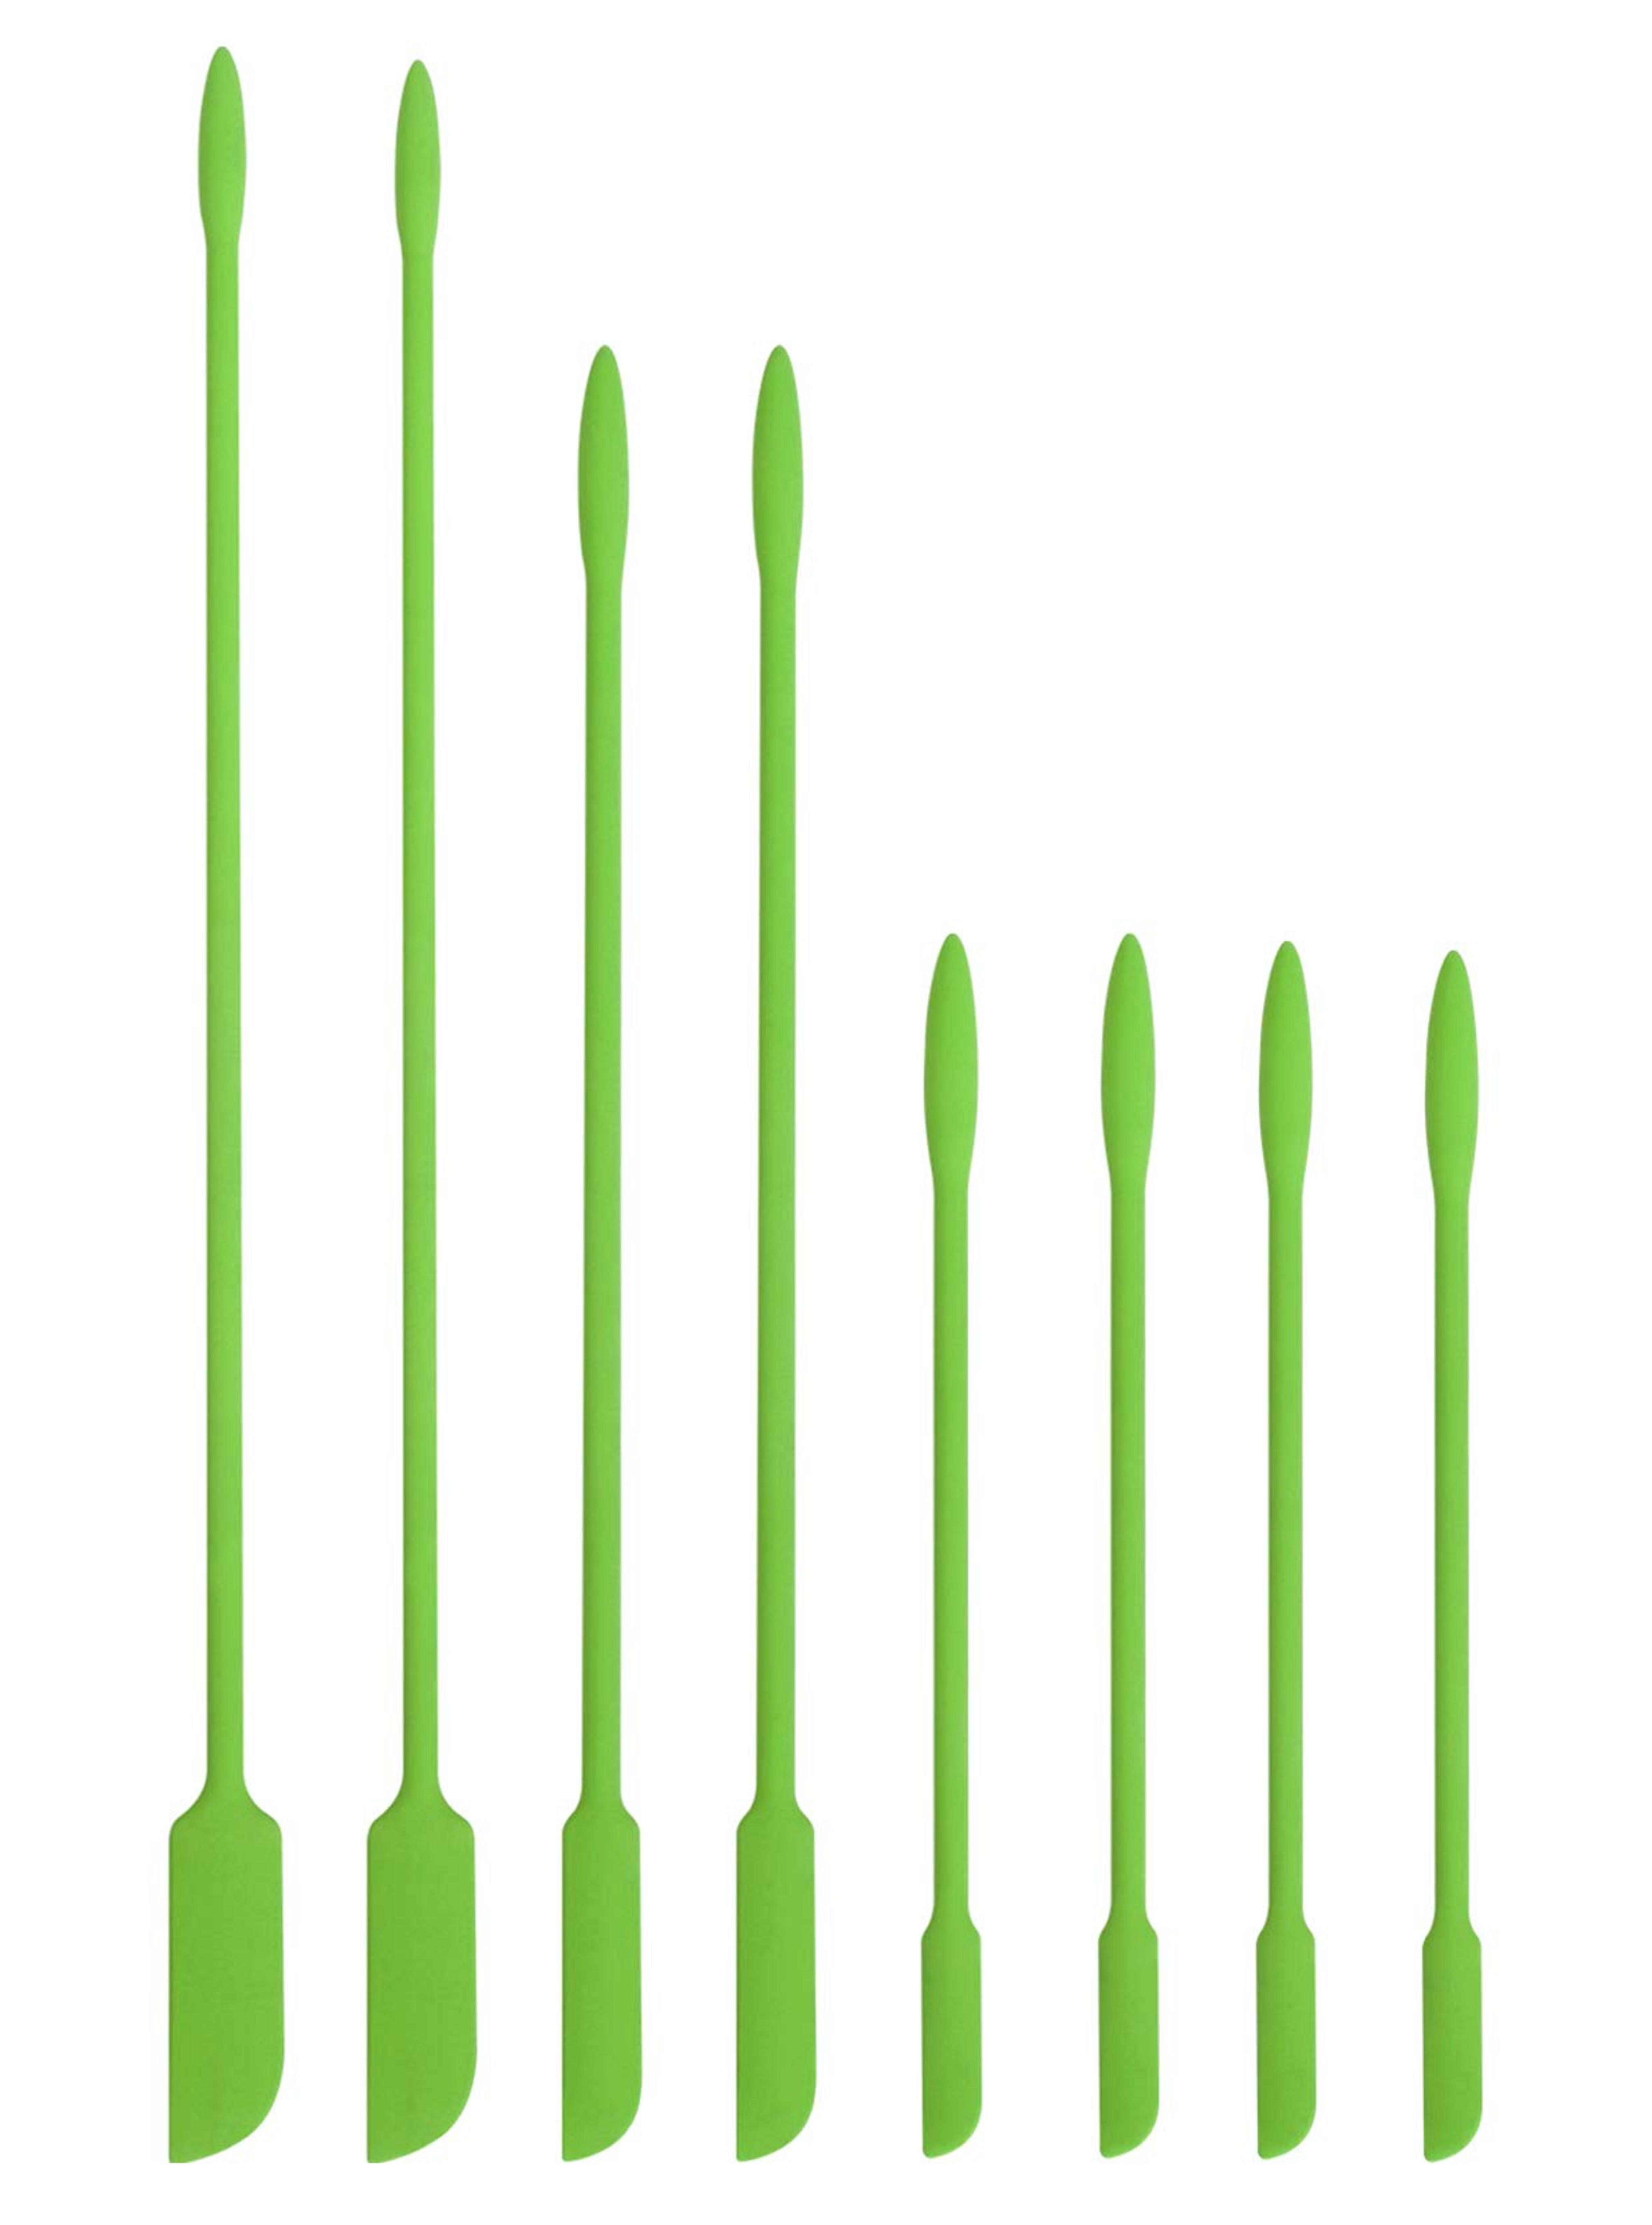 Amazon.com: 8 Pieces Mini Silicone Spatula-Makeup Spatula-Small Silicone Spatula-Thin Spatula Set for Skinny Openings-EVEREST GOOSE Tiny Scraper for Jar,Kitchen Bottles,Cosmetic(Green): Home & Kitchen